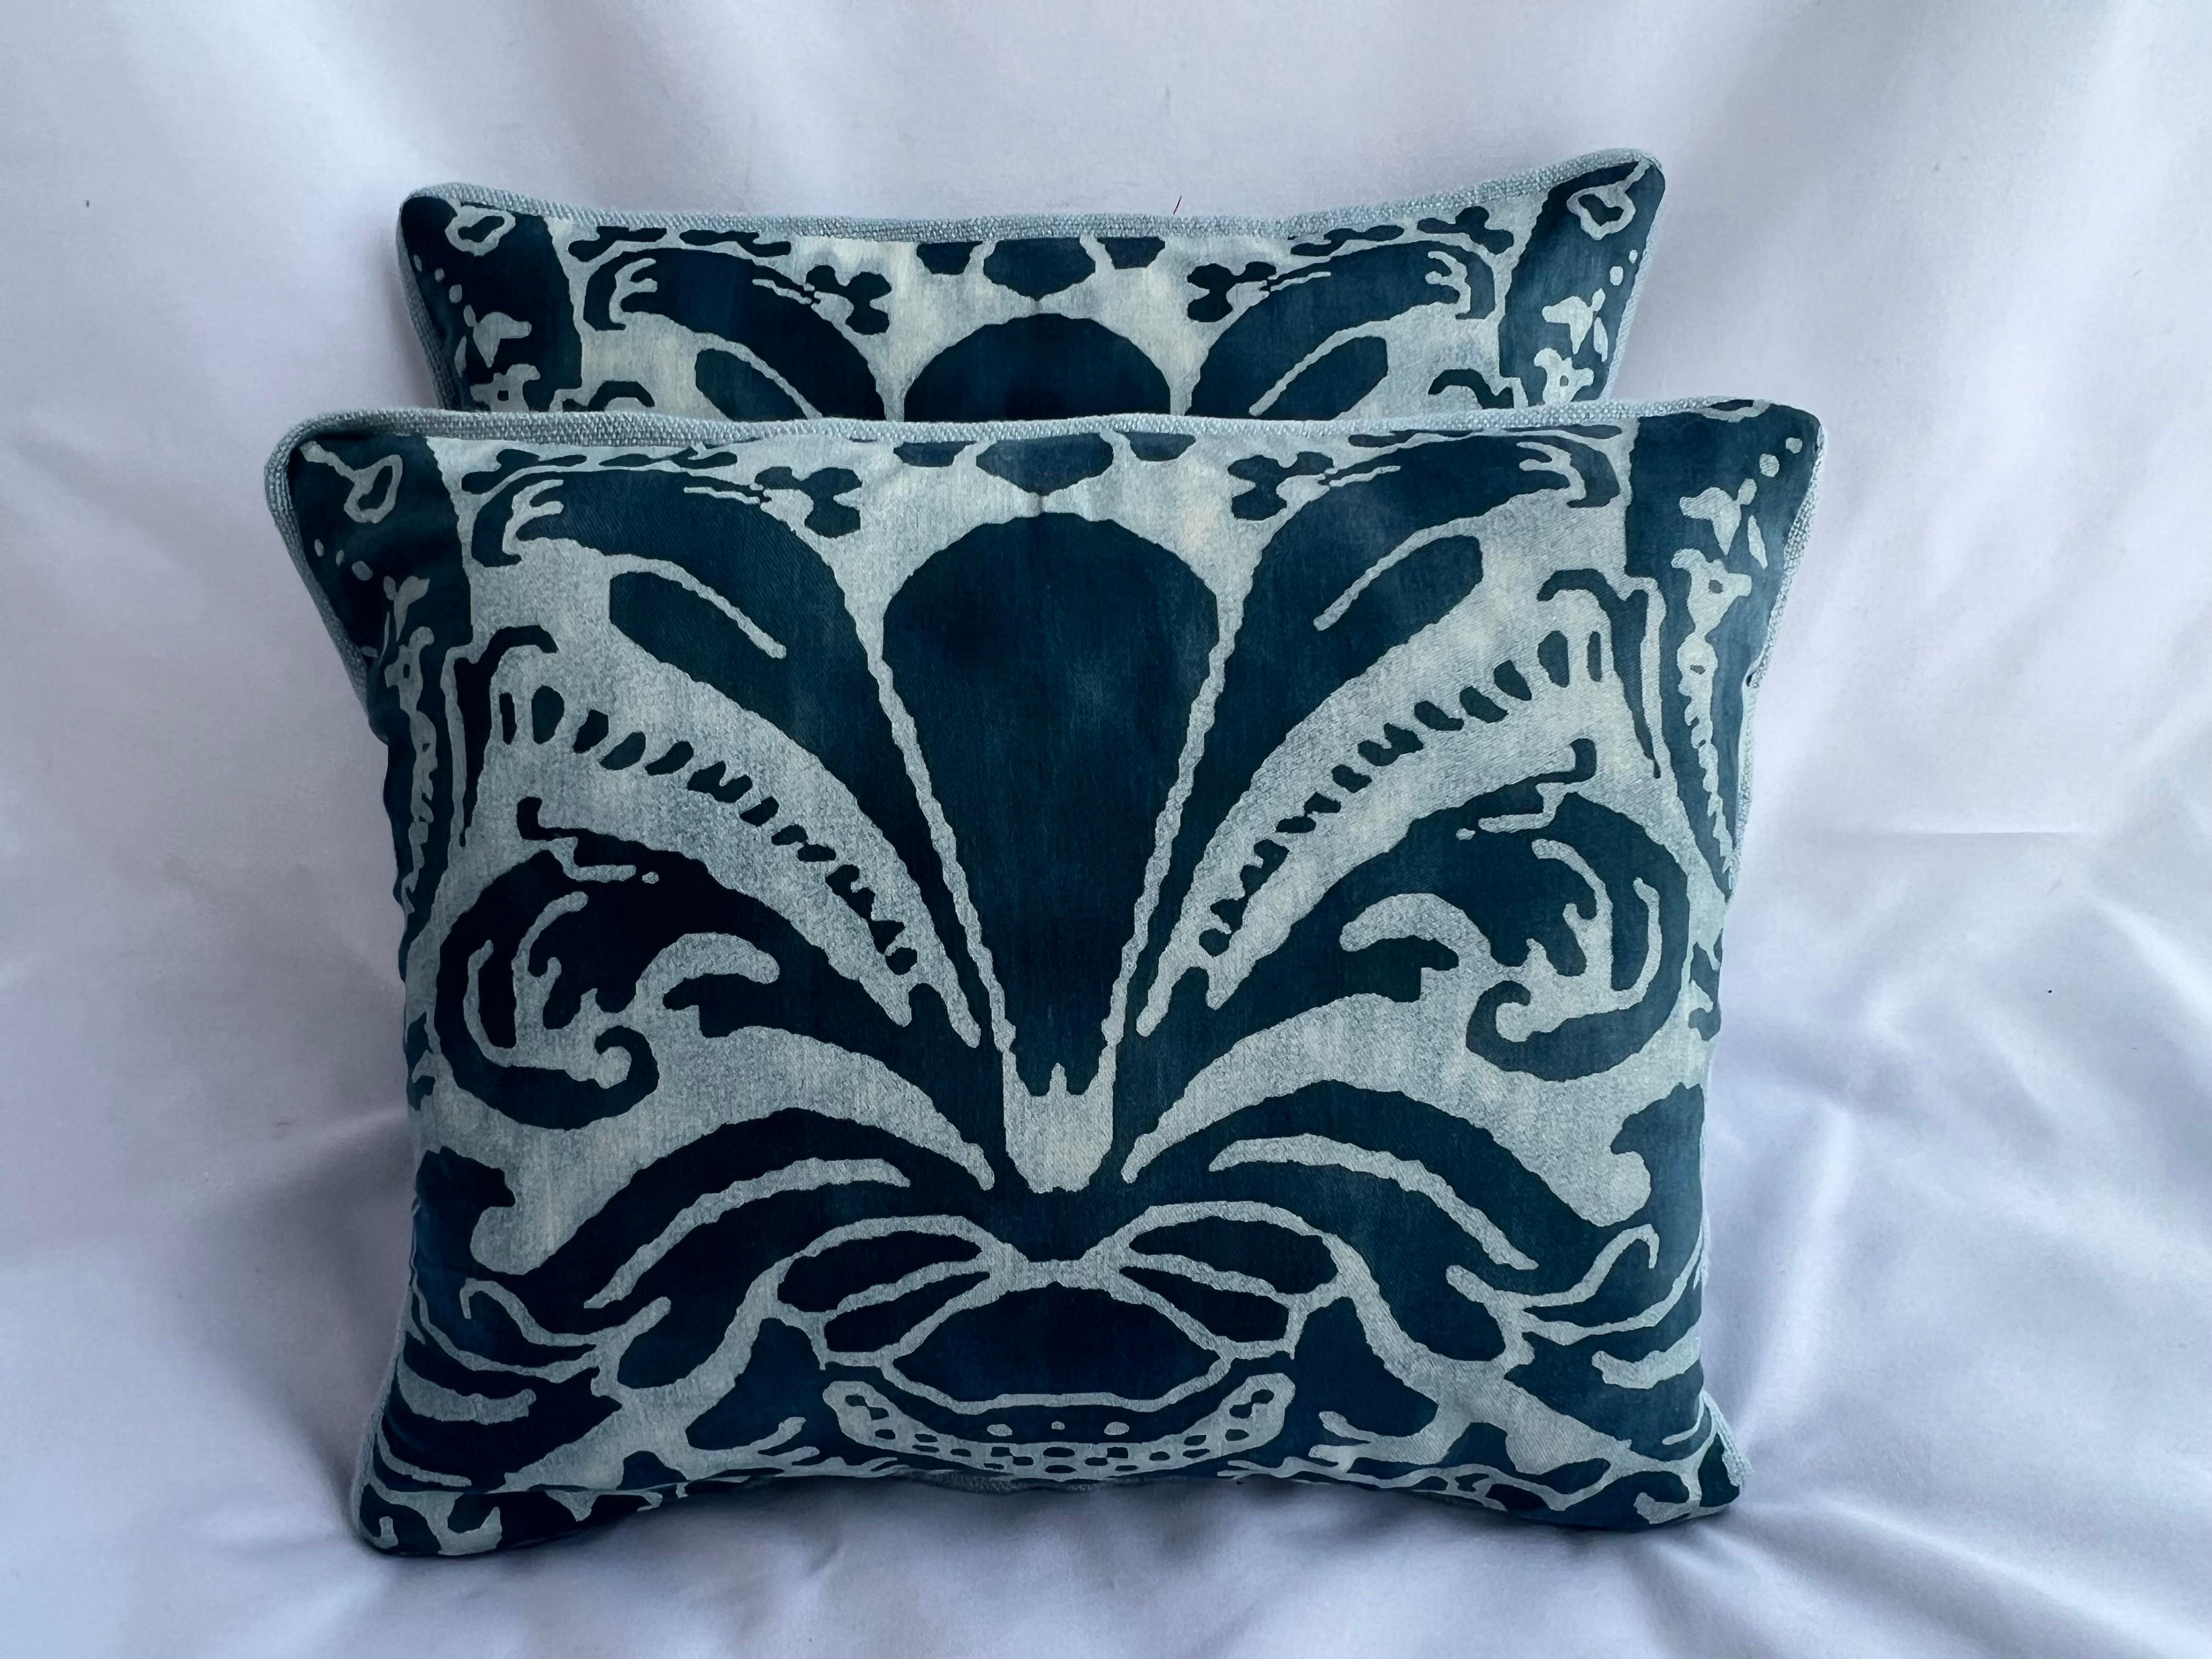 Pair of unique custom pillows made with discontinued Caravaggio patterned Fortuny pillow fronts and soft faded blue linen backs.  Self cording, down inserts, zipper closures.